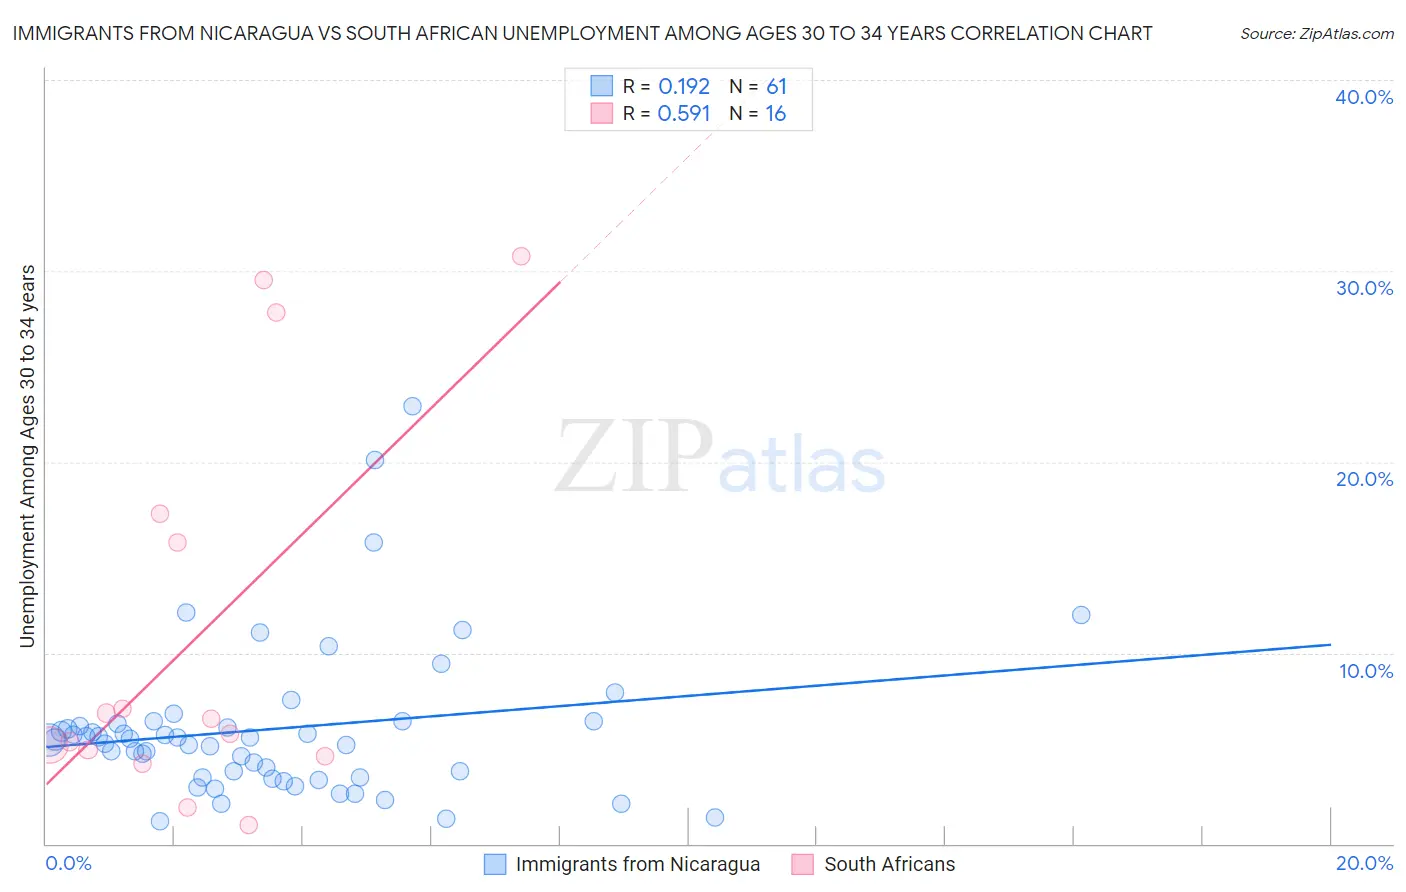 Immigrants from Nicaragua vs South African Unemployment Among Ages 30 to 34 years